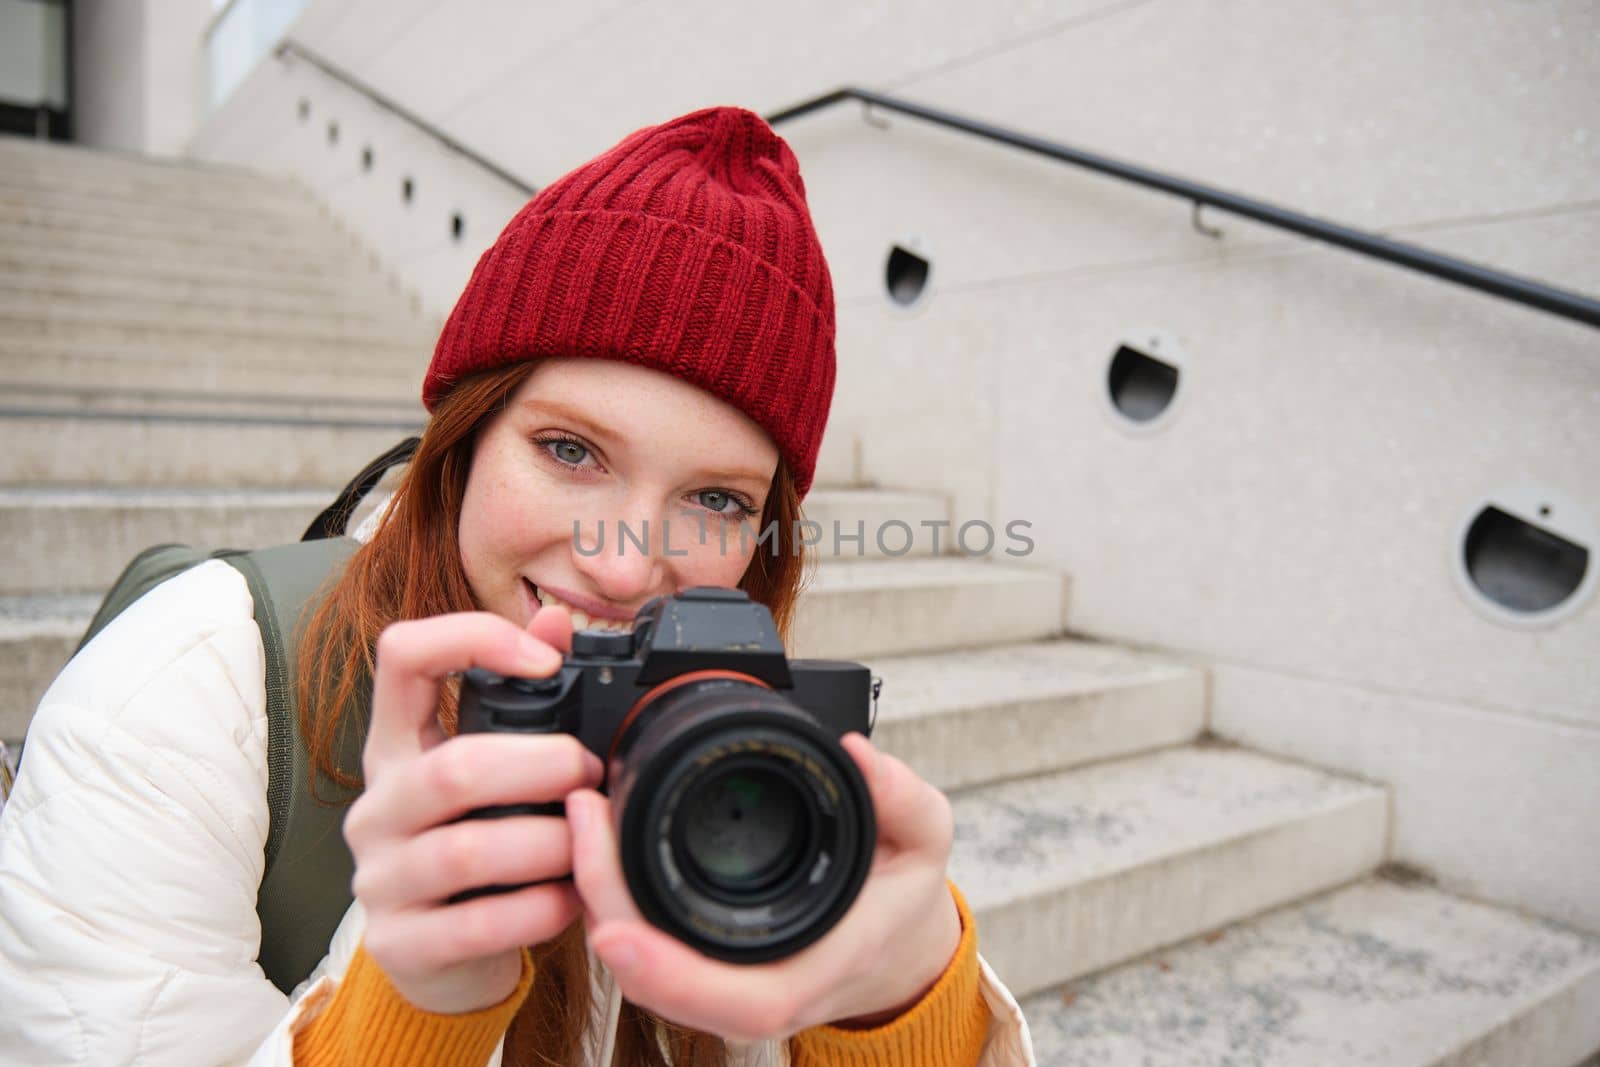 Portrait of female photographer walking around city with professional camera, taking pictures capturing urban shots, photographing outdoors.